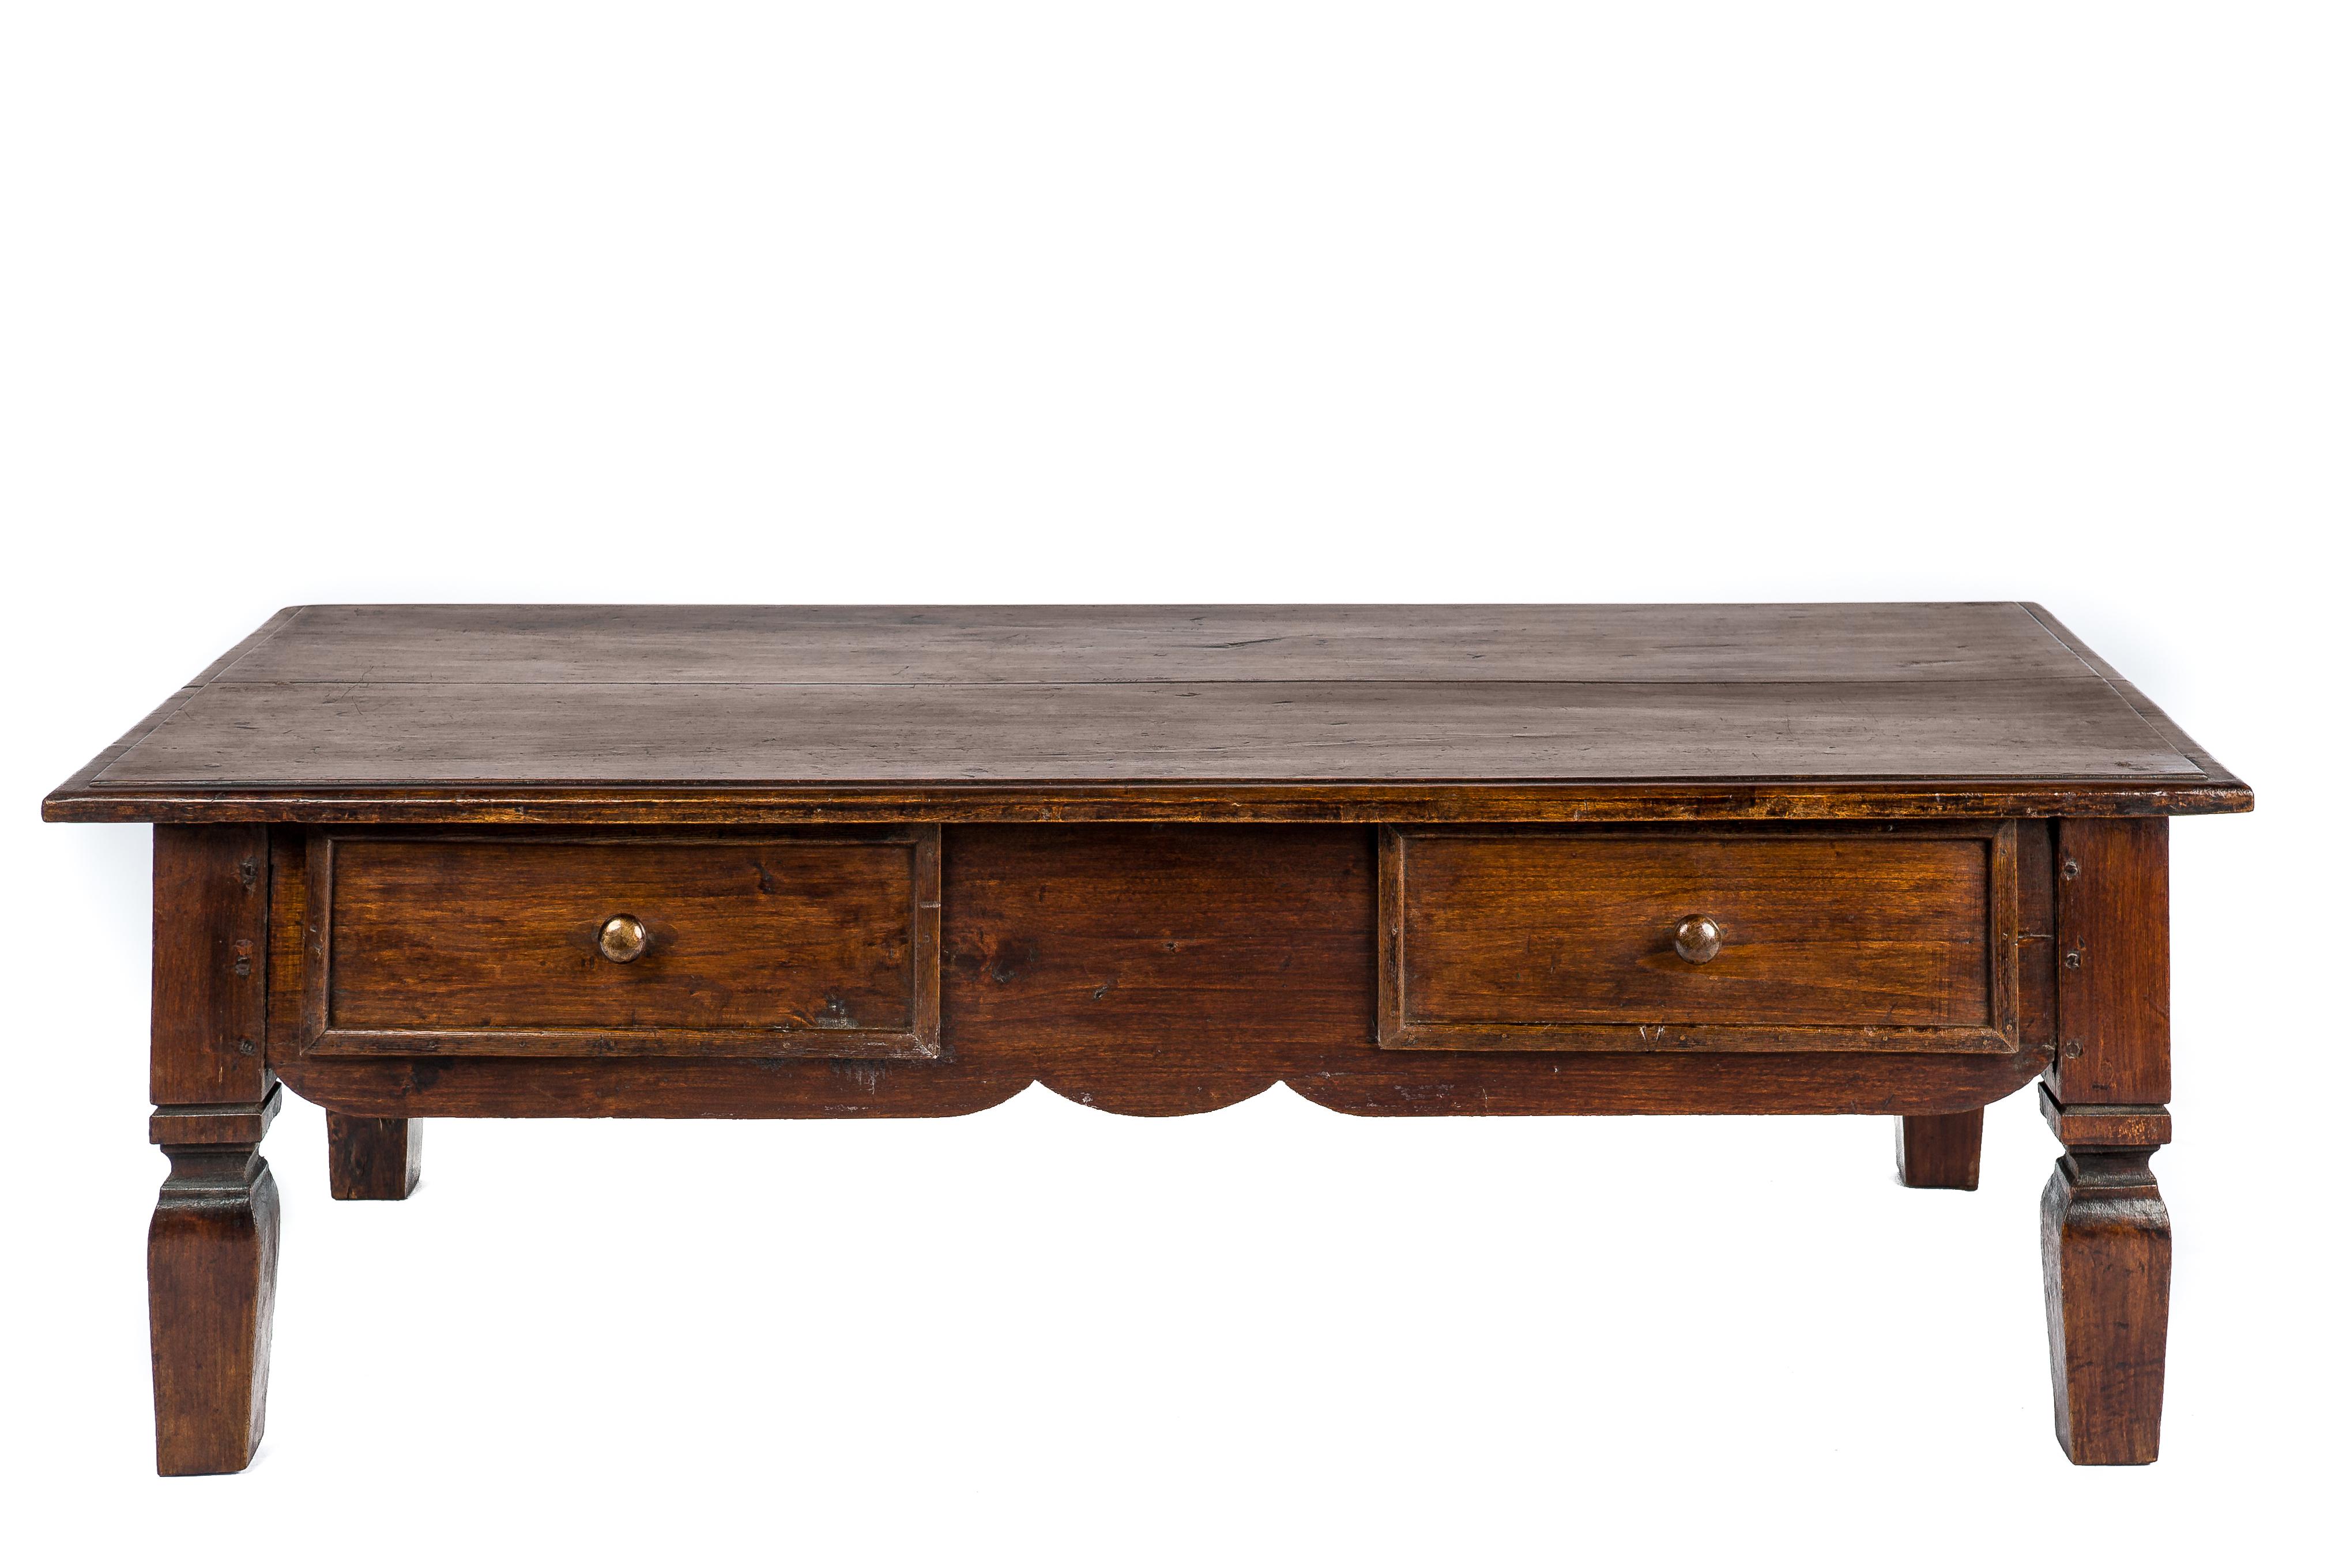 This beautiful warm brown rural coffee table or low table originates in Spain and dates circa 1820. This rustic table has a beautiful top that was made from two boards of solid elm. The top has a beautiful patina and shows many marks and dents